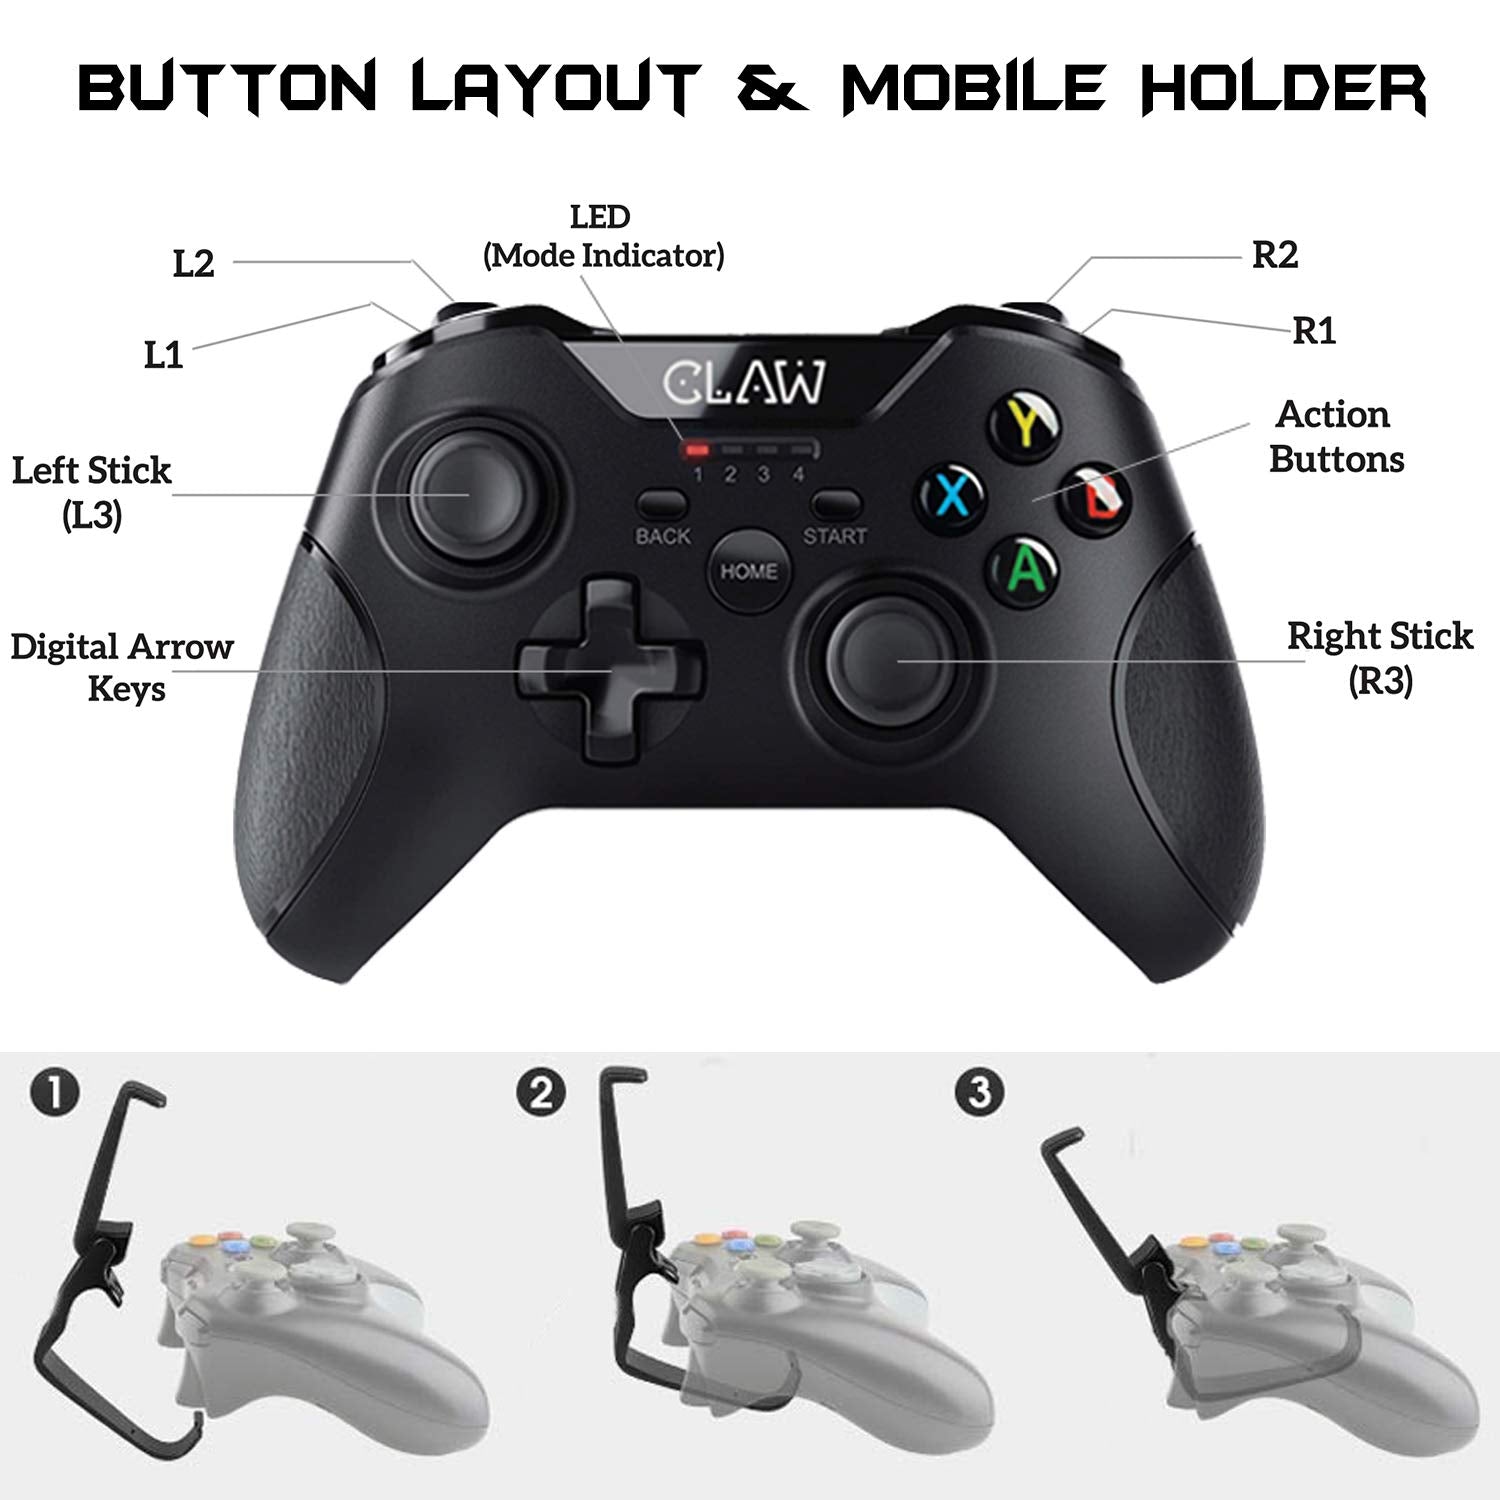 CLAW Shoot Bluetooth Mobile Gamepad (Upgraded 2022 version) (Use Code Origin5 to Get 5% DIscount)